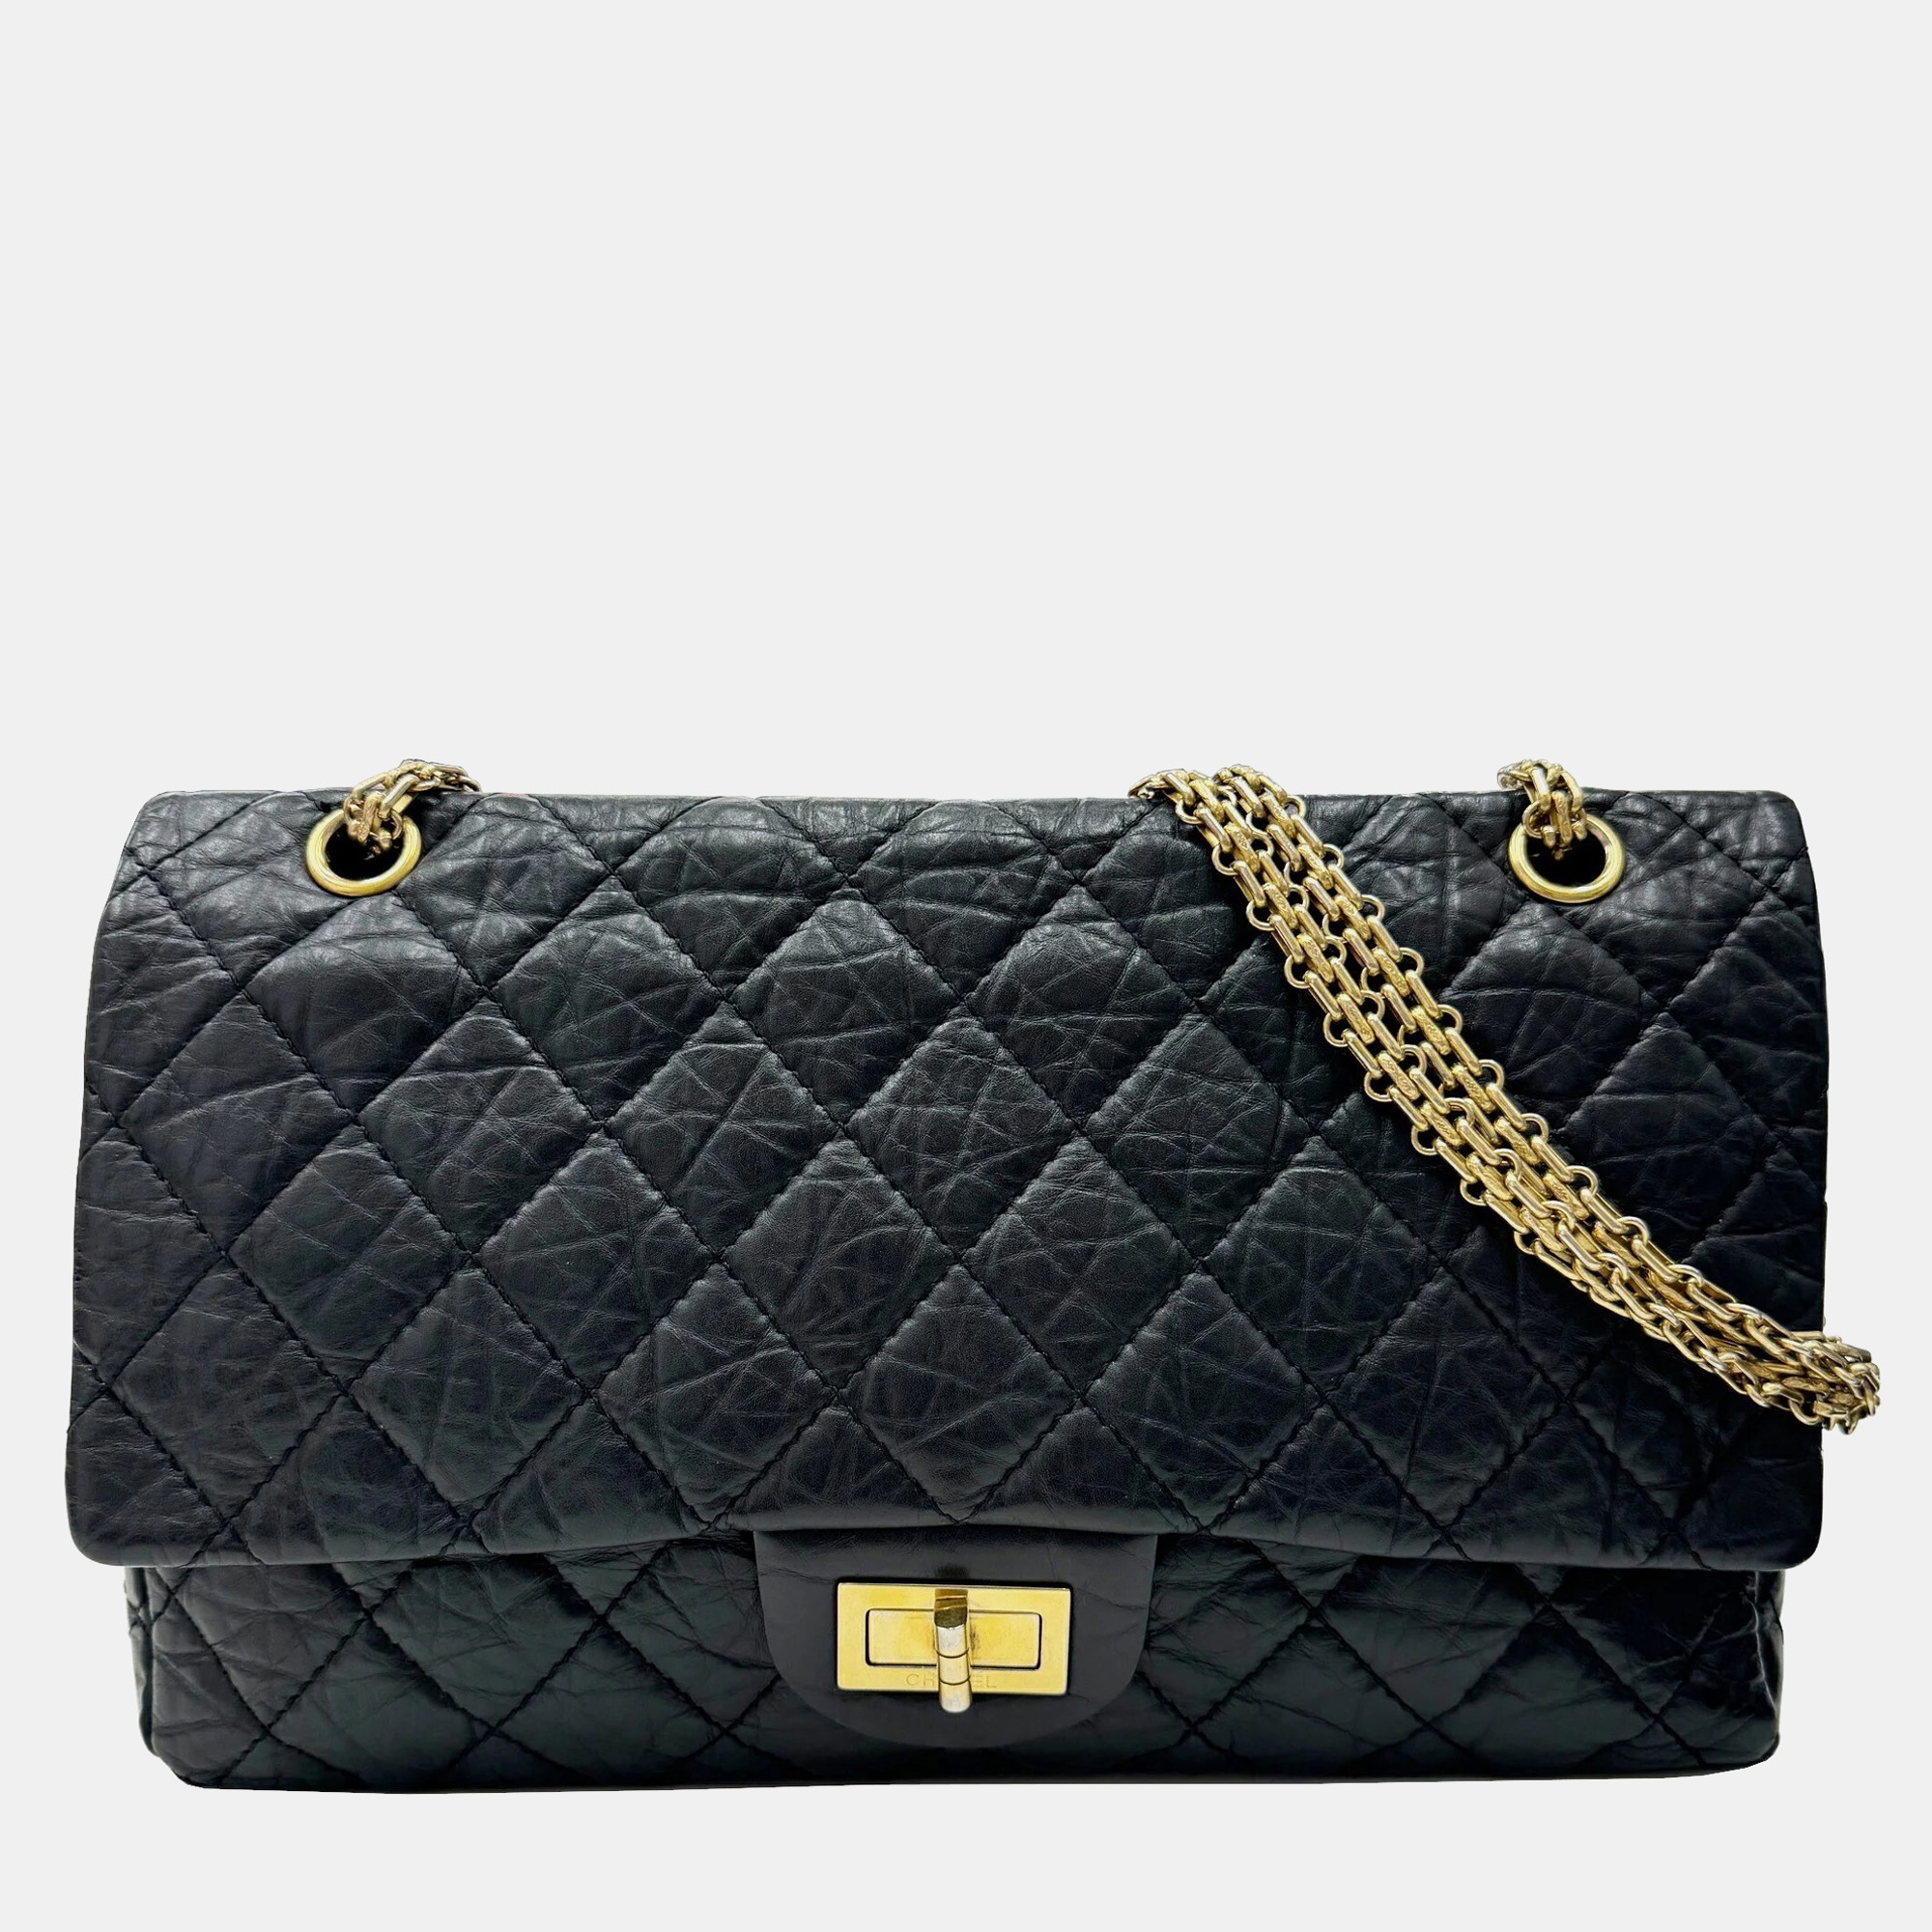 

Chanel Black Aged Calfskin Quilted 2.55 Reissue 226 Flap Bag